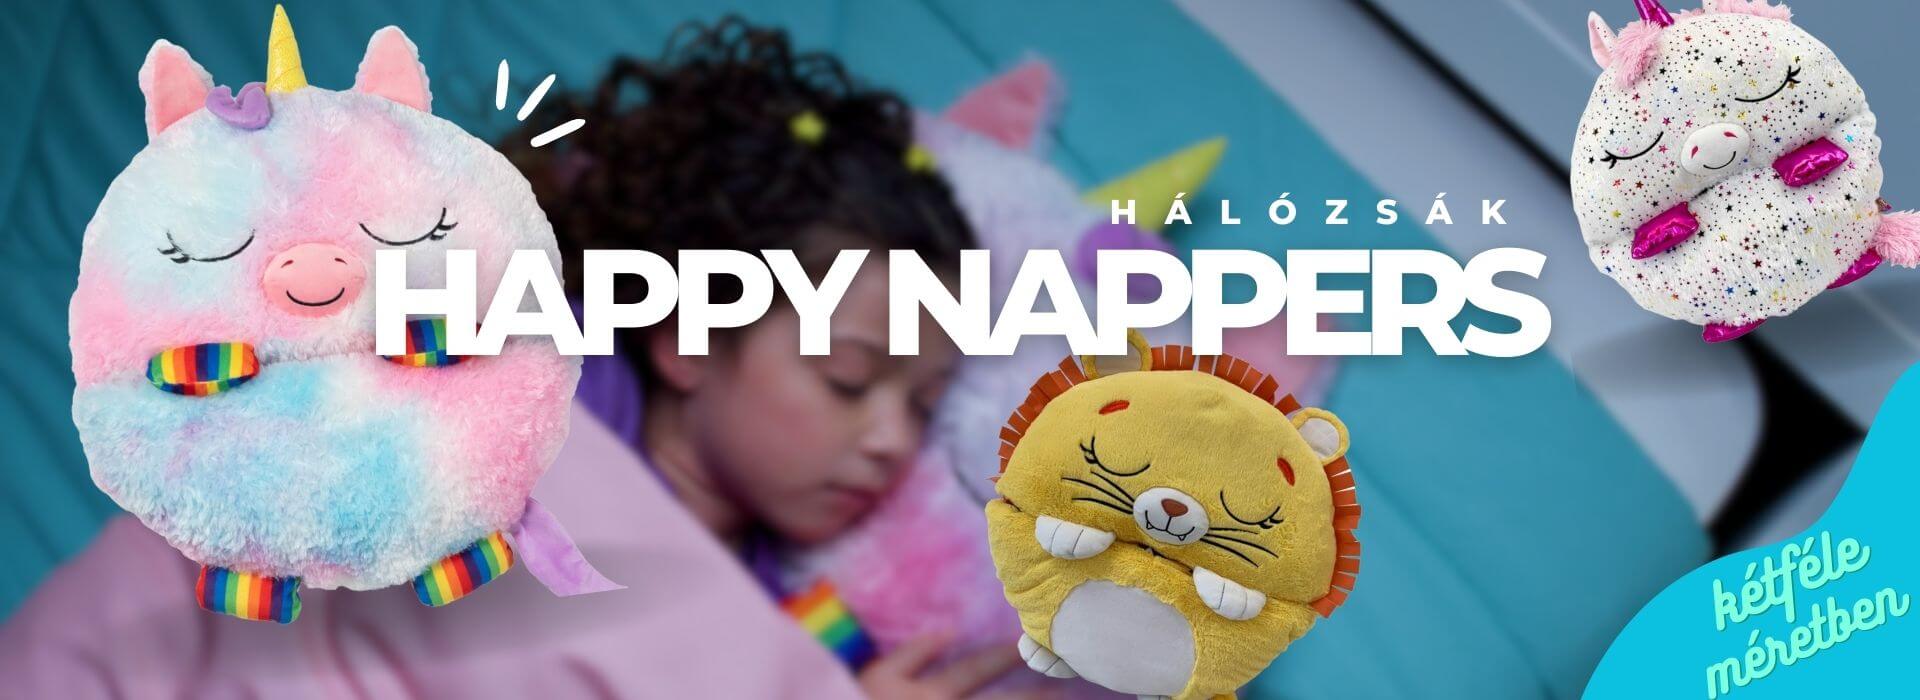 happy nappers